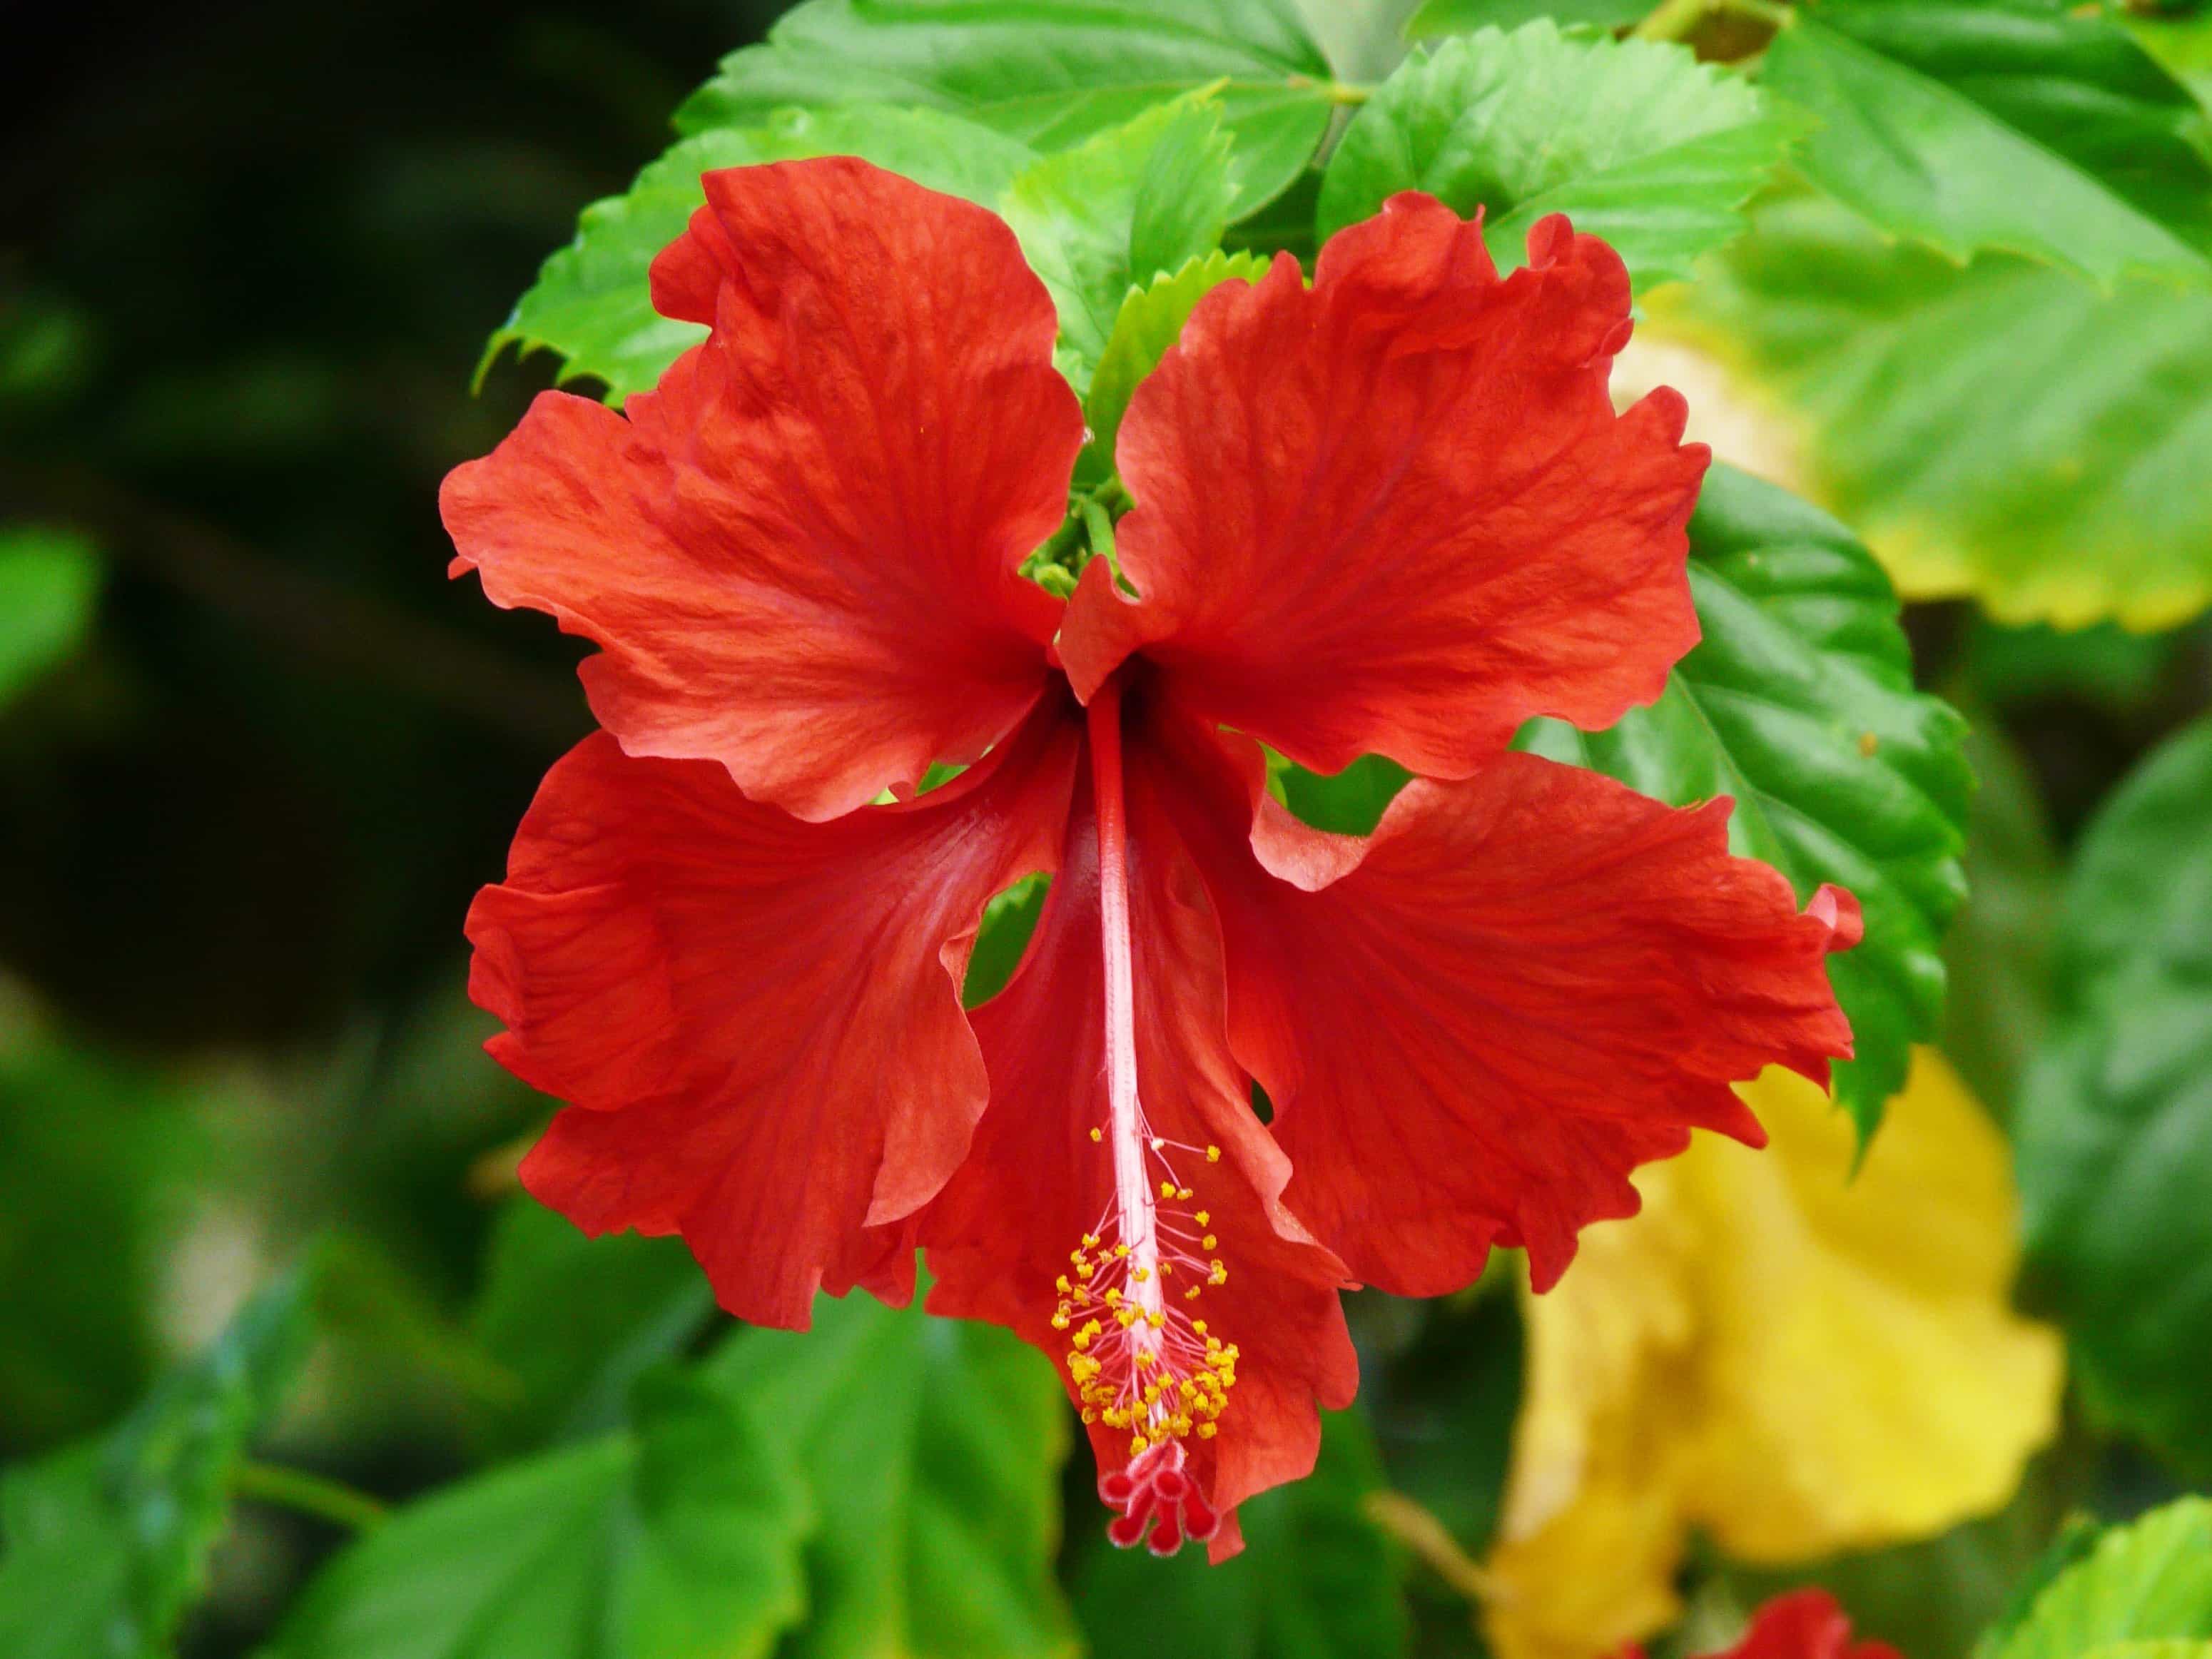 Free picture: hibiscus, red flower, leaf, garden, summer, nature ...